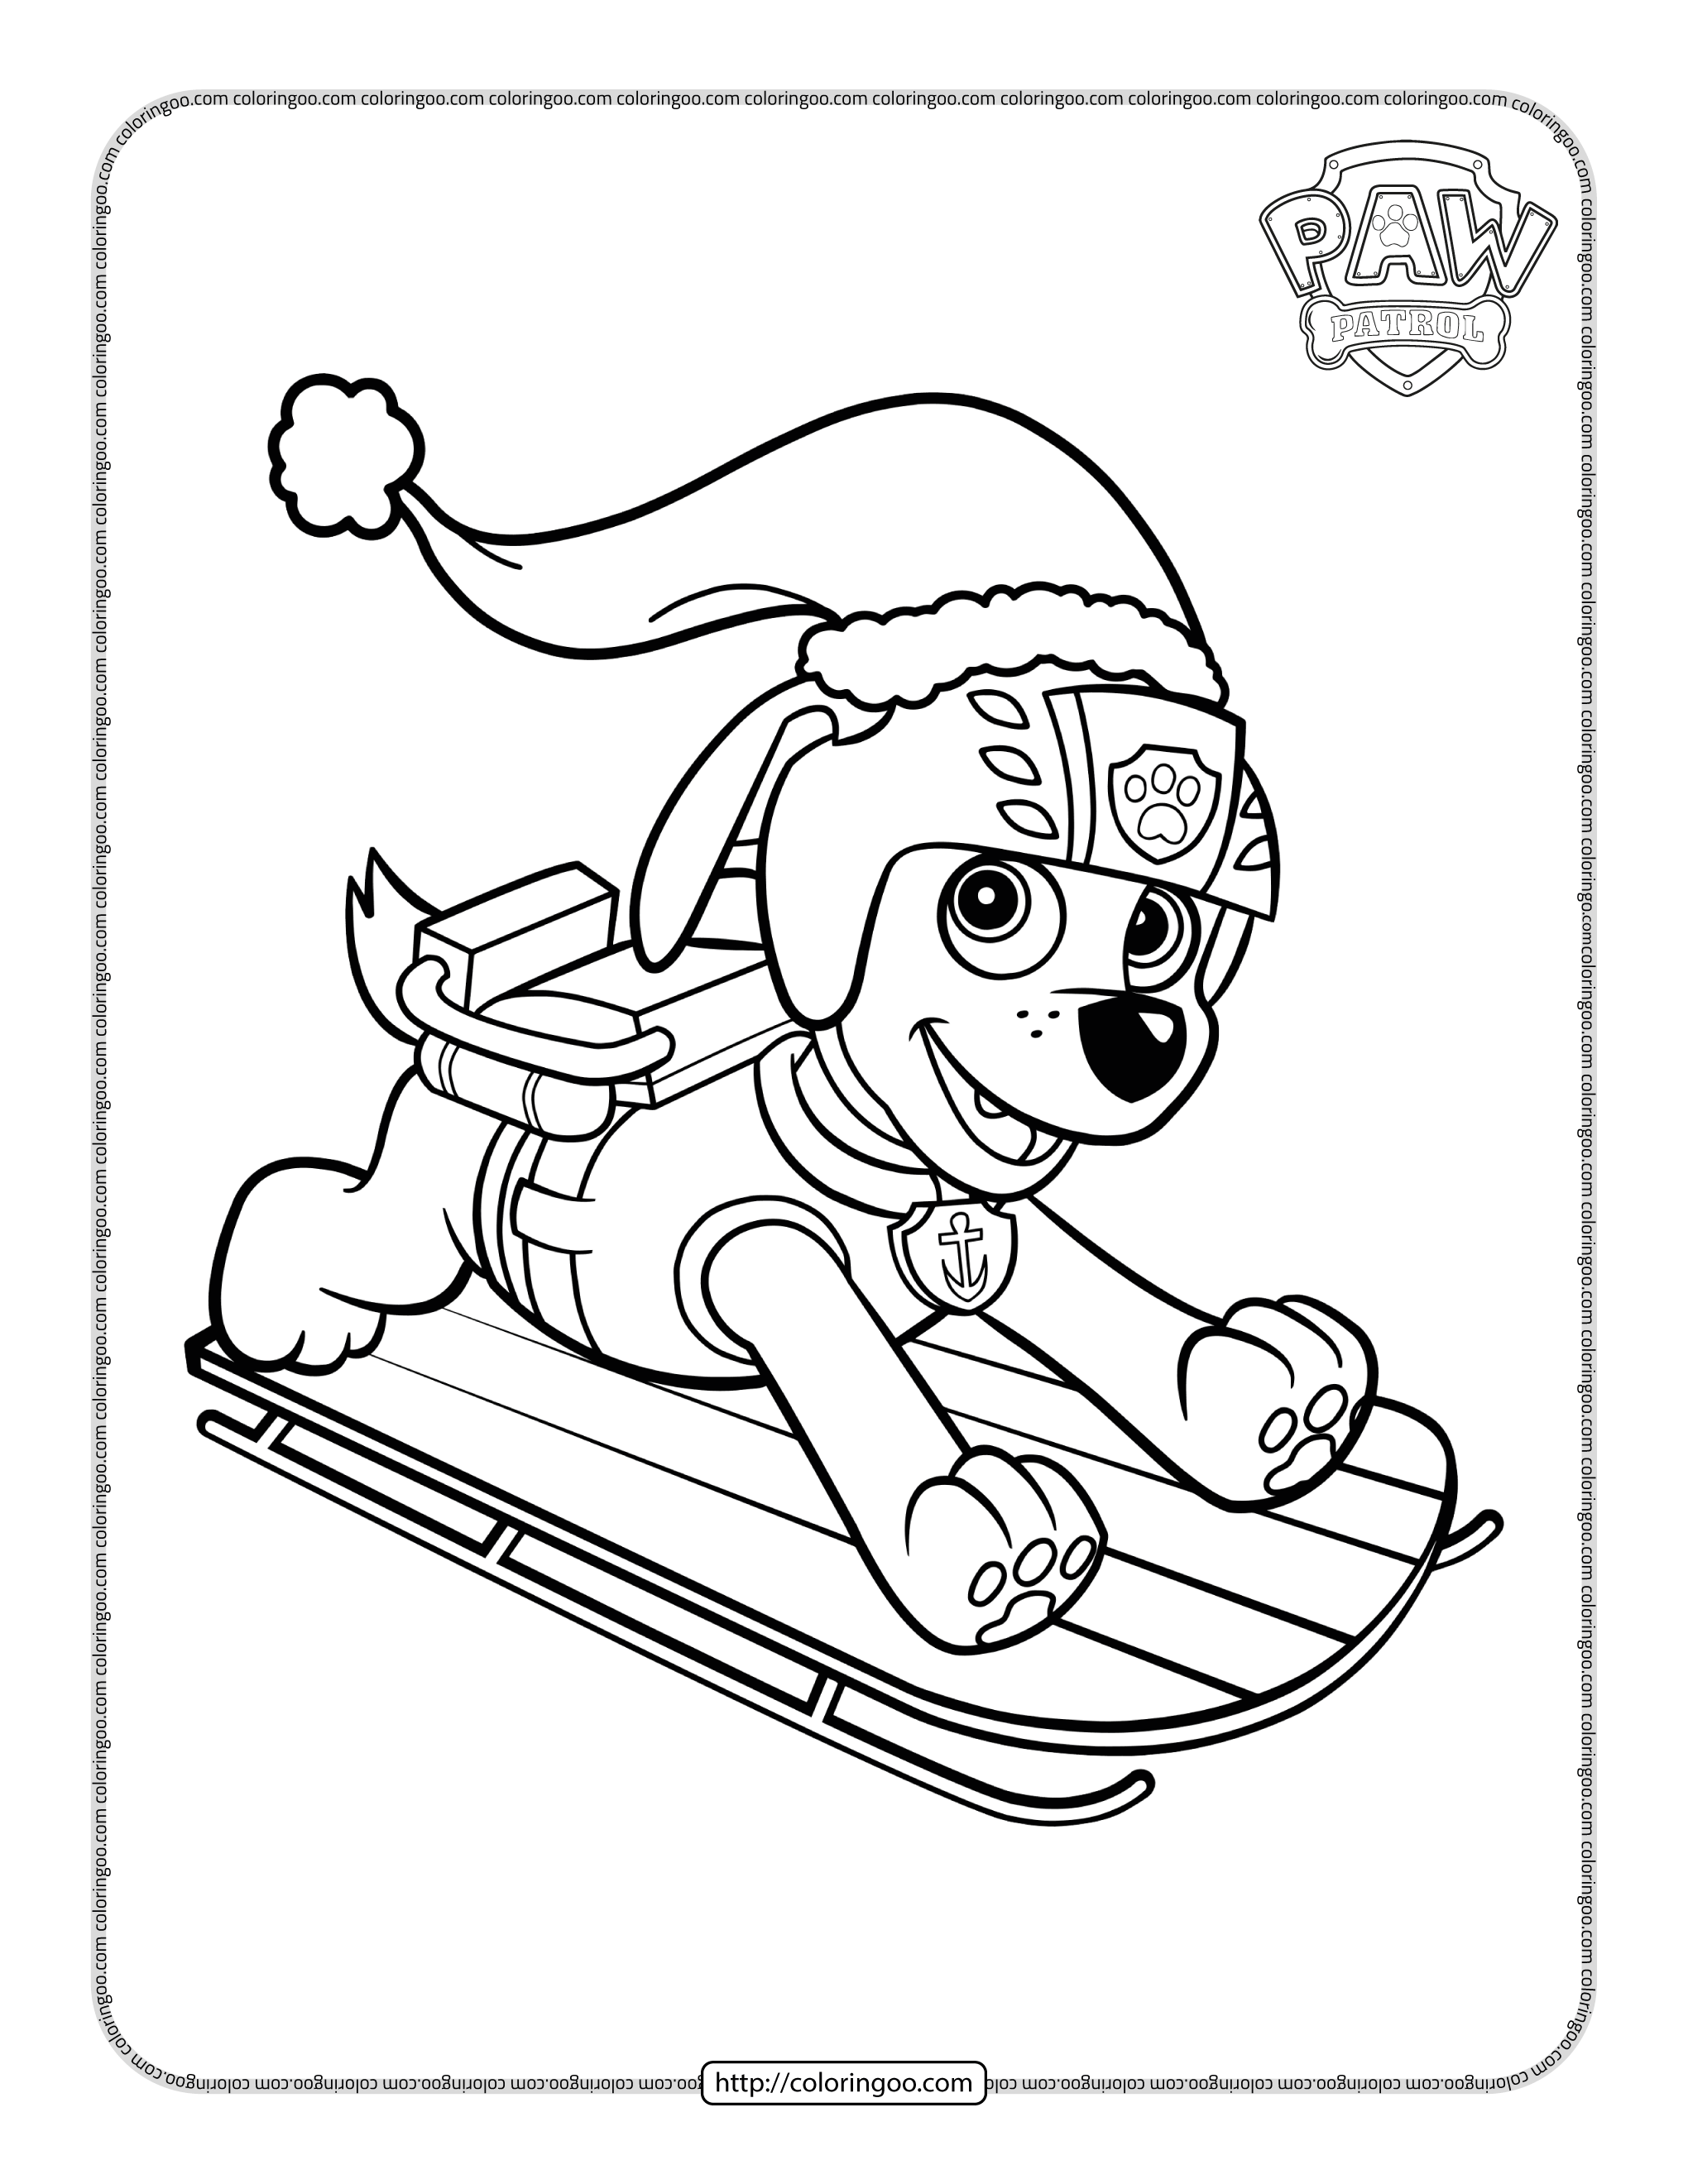 paw patrol zuma on a sled coloring page